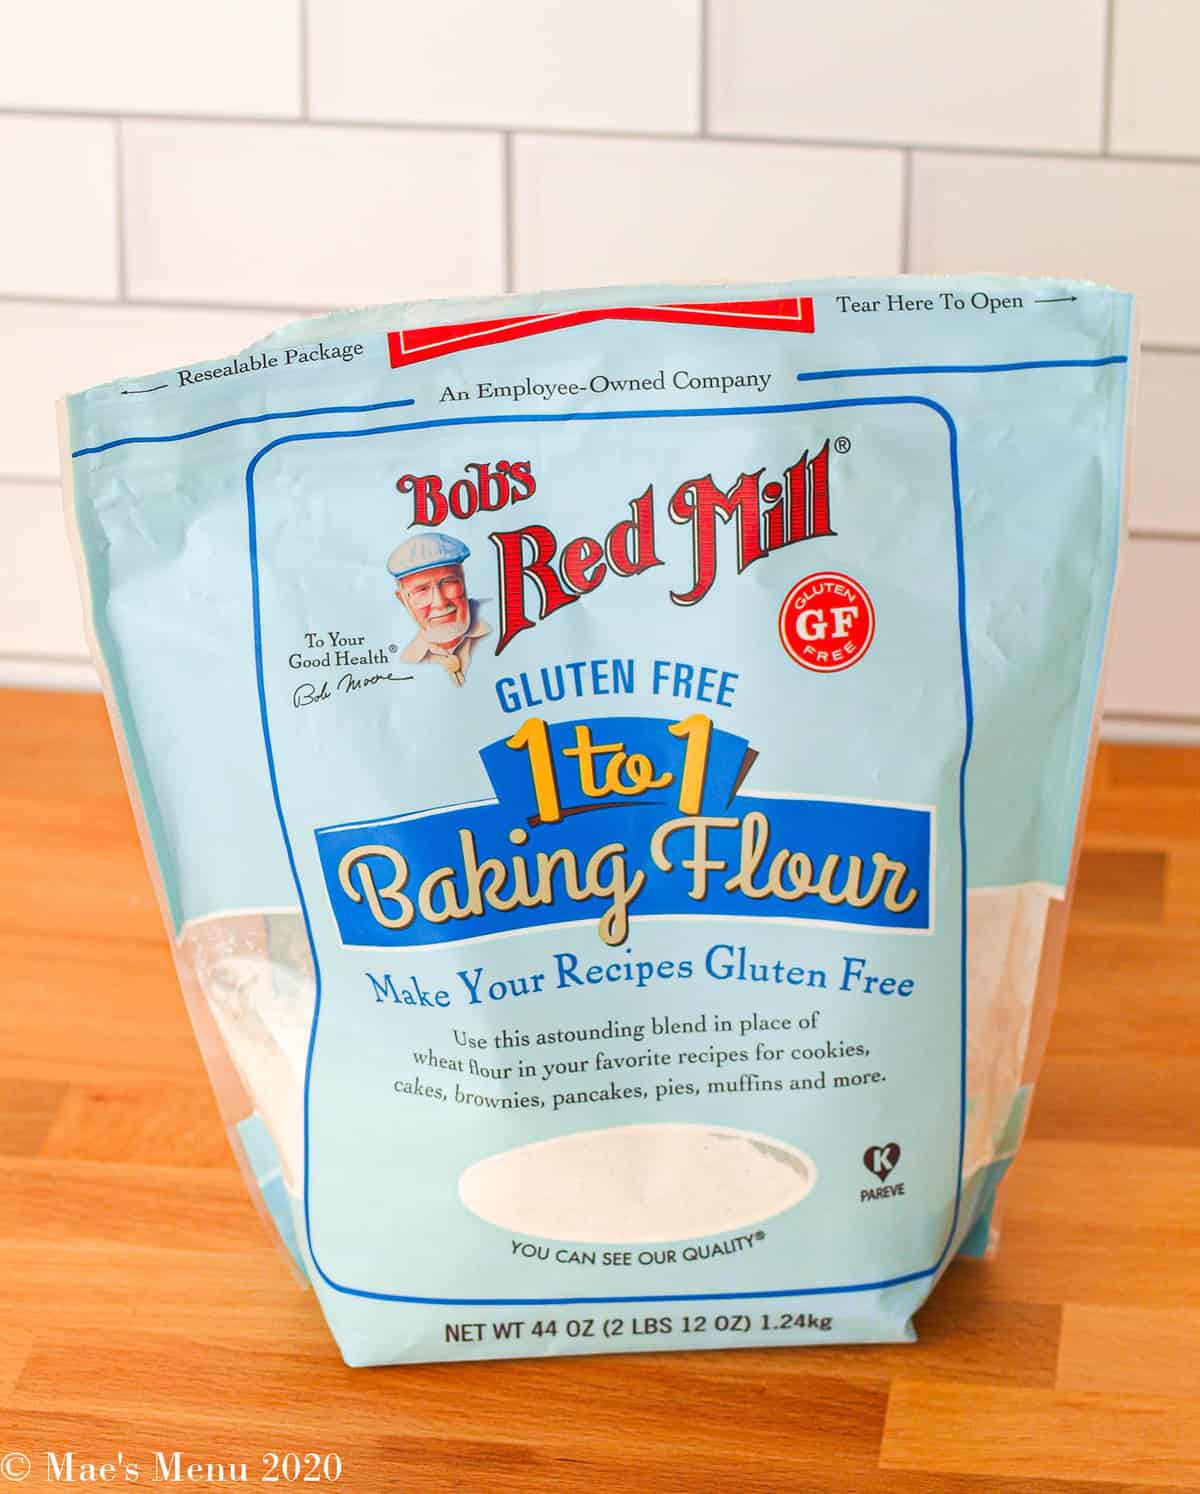 A bag of Bob's Red Mill 1 to 1 Gluten Fee flour